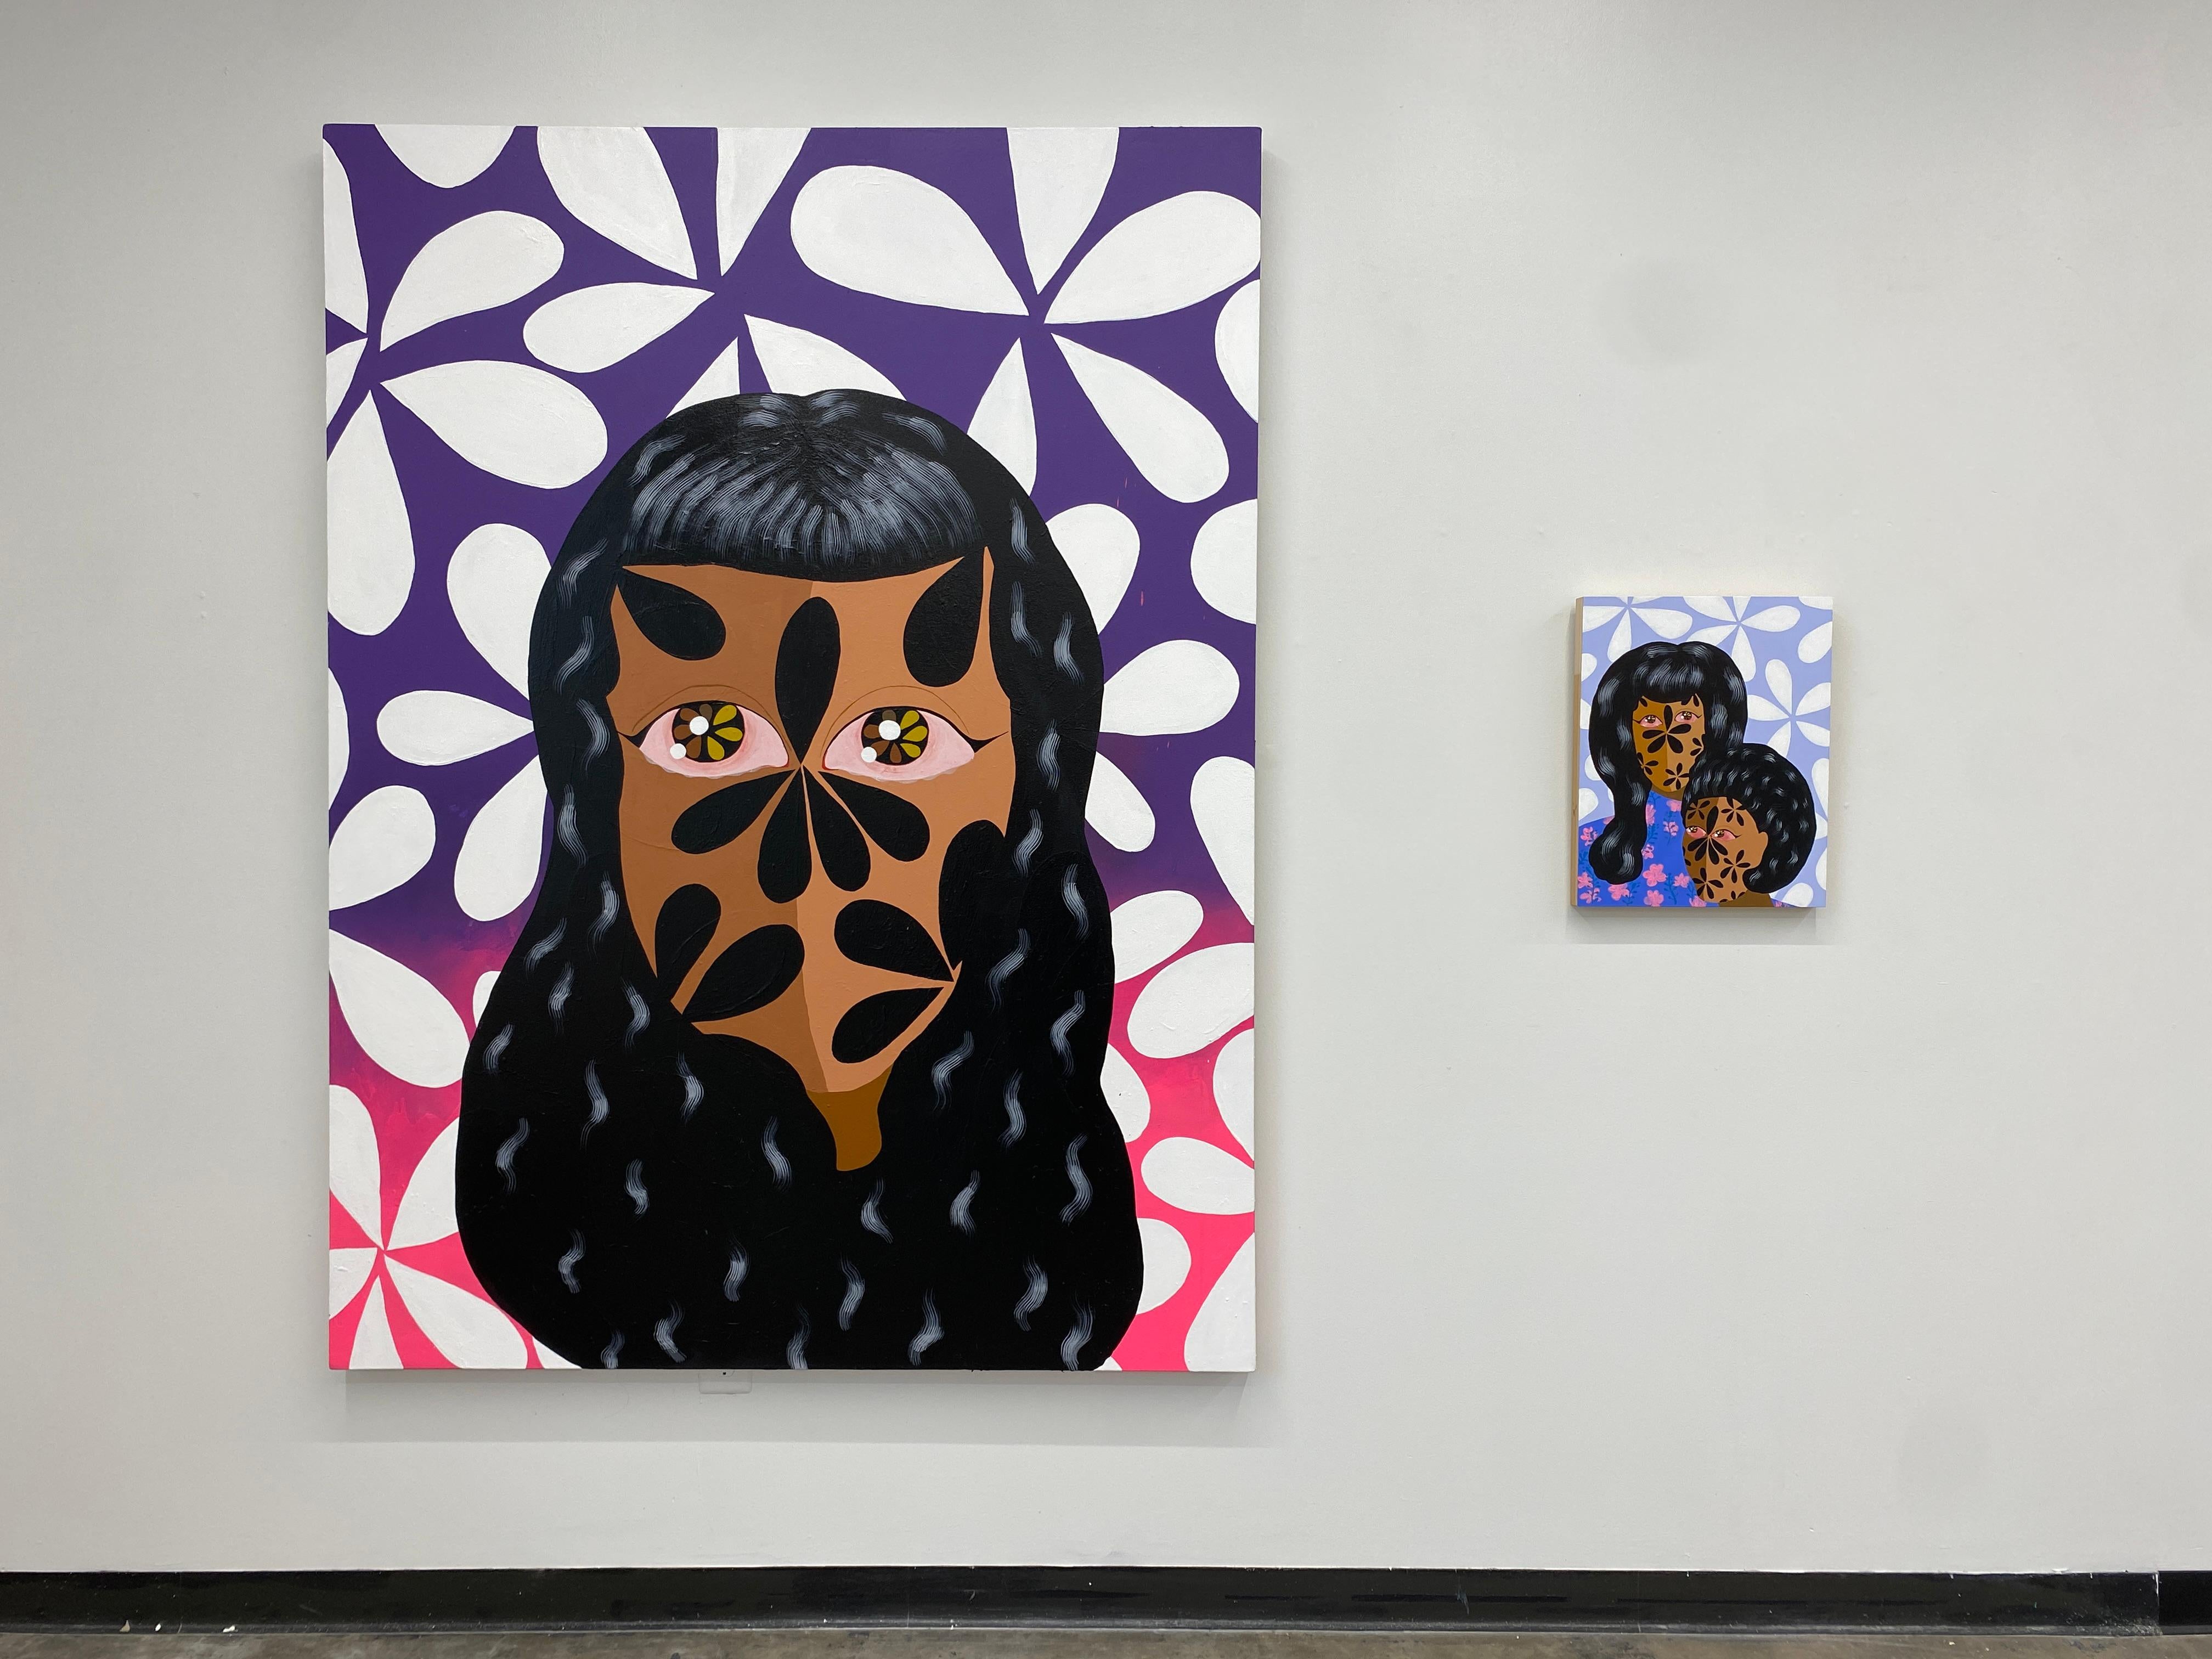 Jasmine Zelaya is a multi- disciplinary first generation Honduran- American artist based in Houston, Texas. The daughter of parents who immigrated to the U.S. in the early 1970’s, much of the artist’s work references the aesthetics of that period.